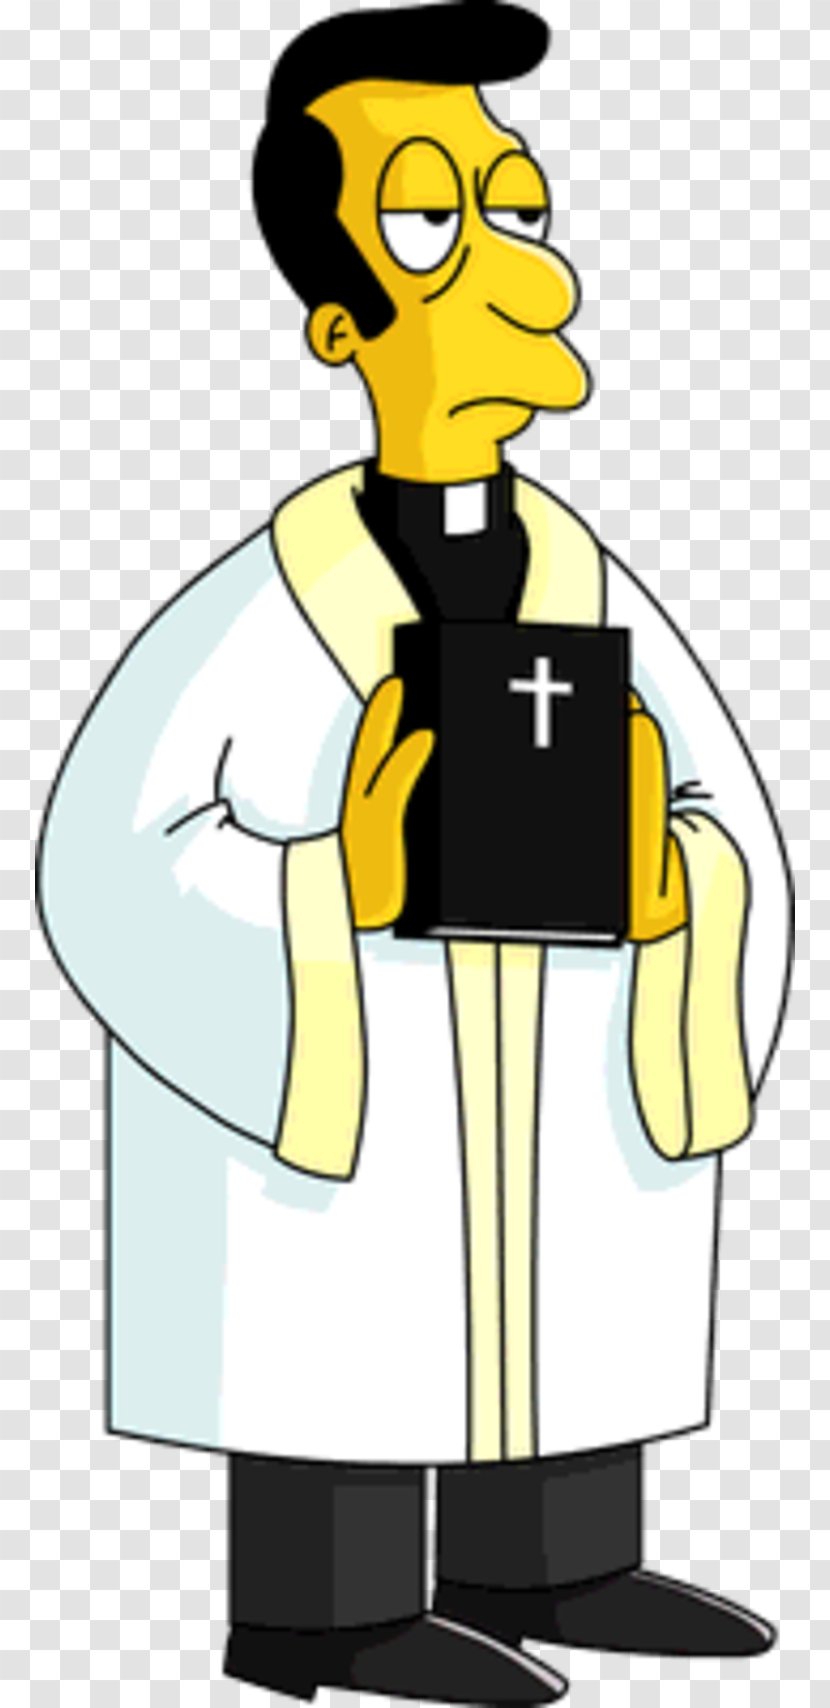 Reverend Lovejoy The Simpsons: Tapped Out Ned Flanders Waylon Smithers Moe Szyslak - Artwork - Simpsons Transparent PNG